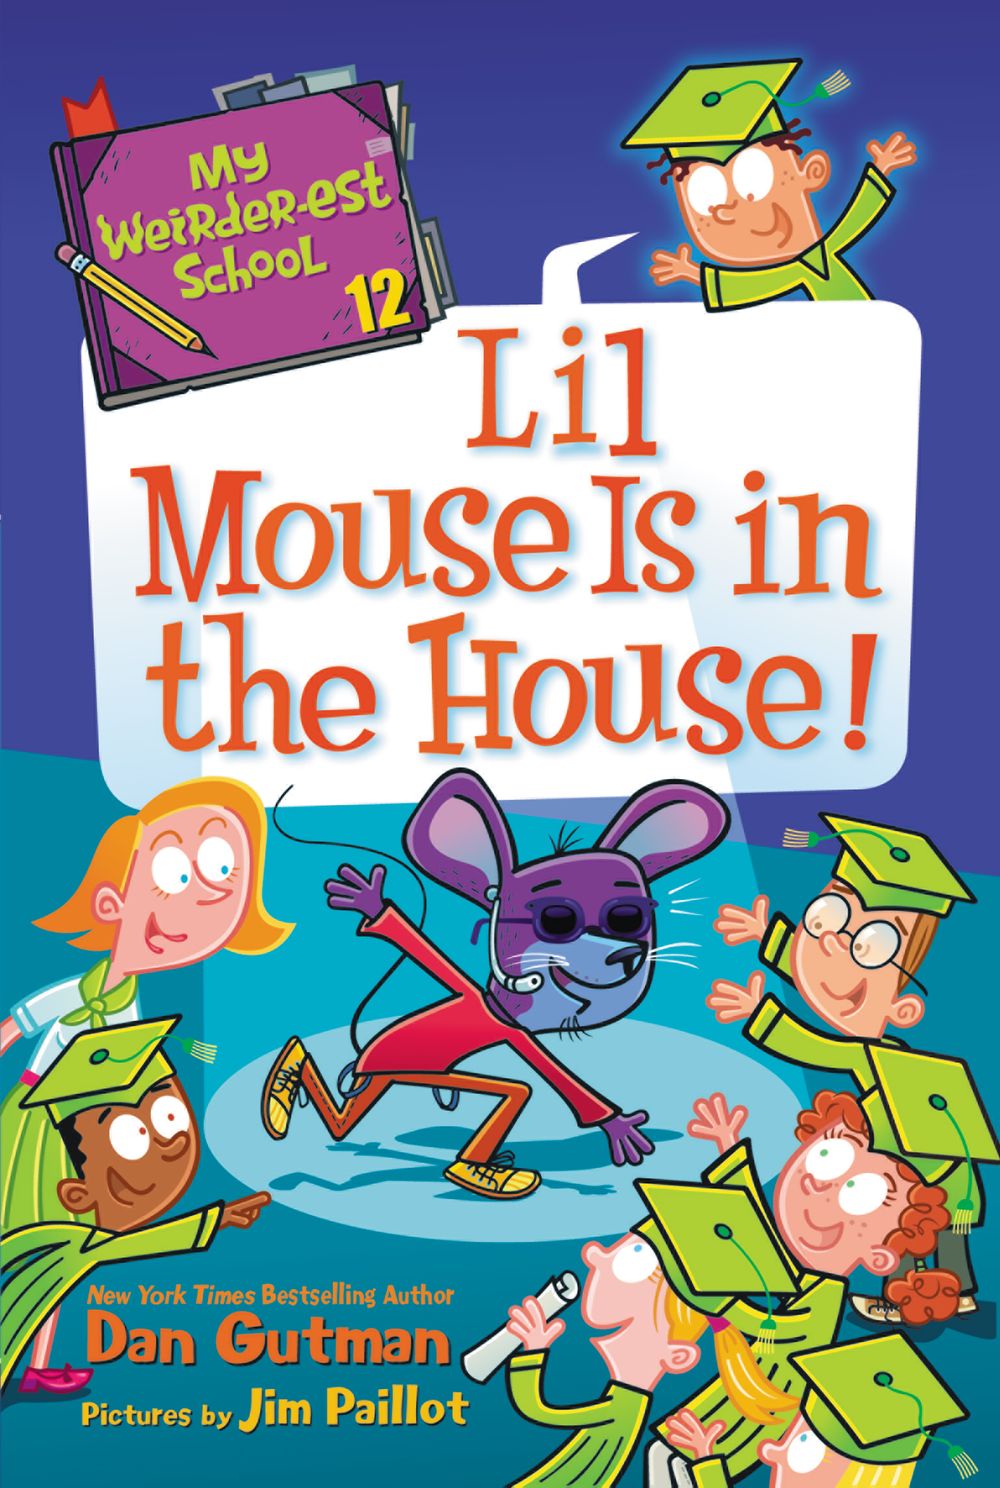 My Weirder-est School #12: Lil Mouse Is in the House